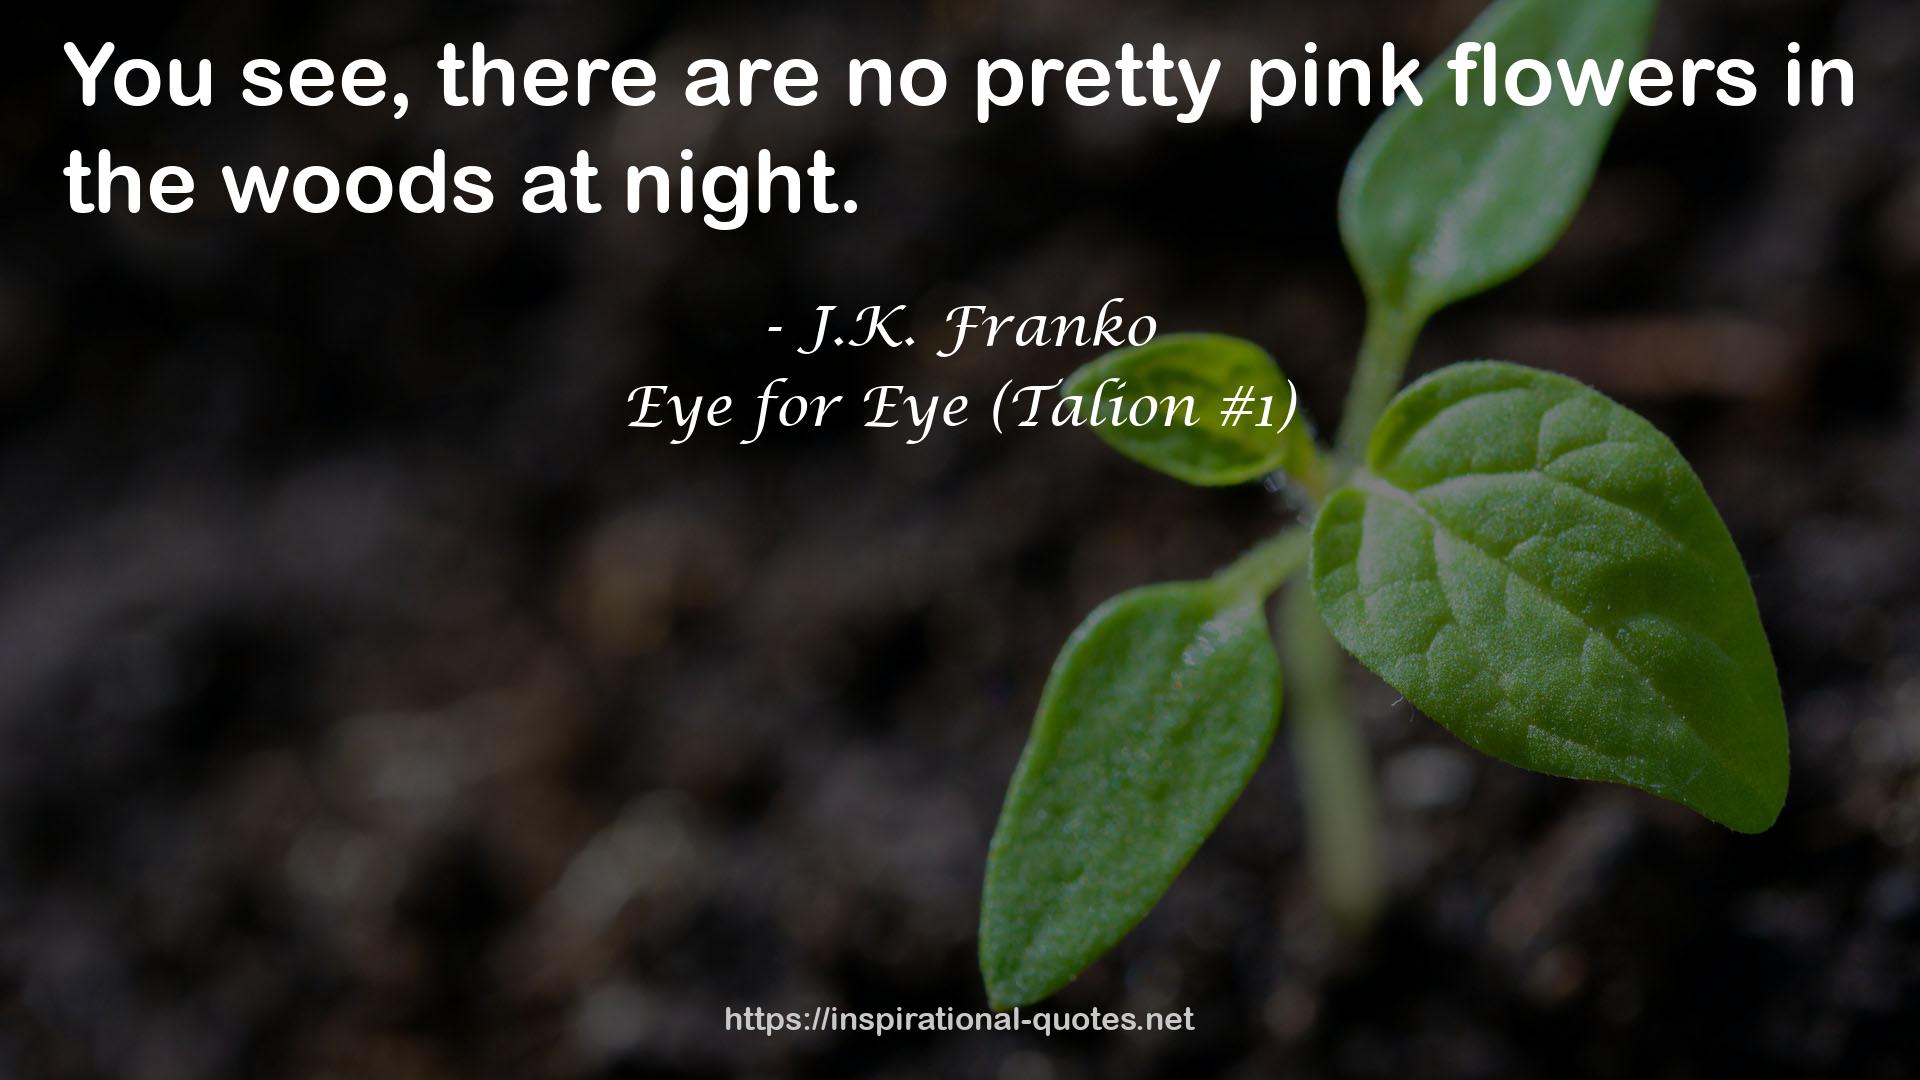 Eye for Eye (Talion #1) QUOTES